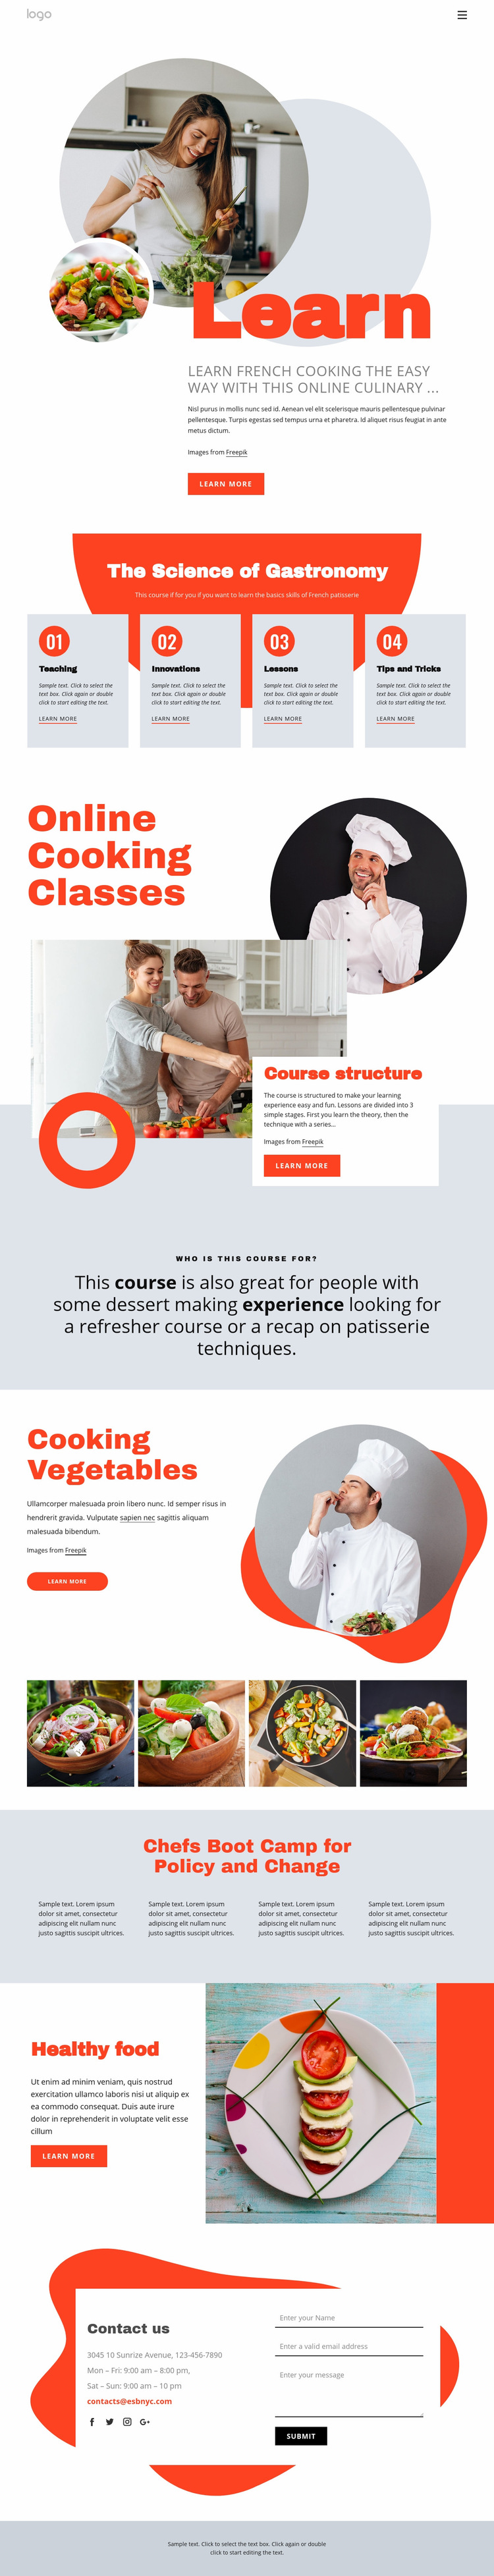 Learn cooking the easy way Web Page Design